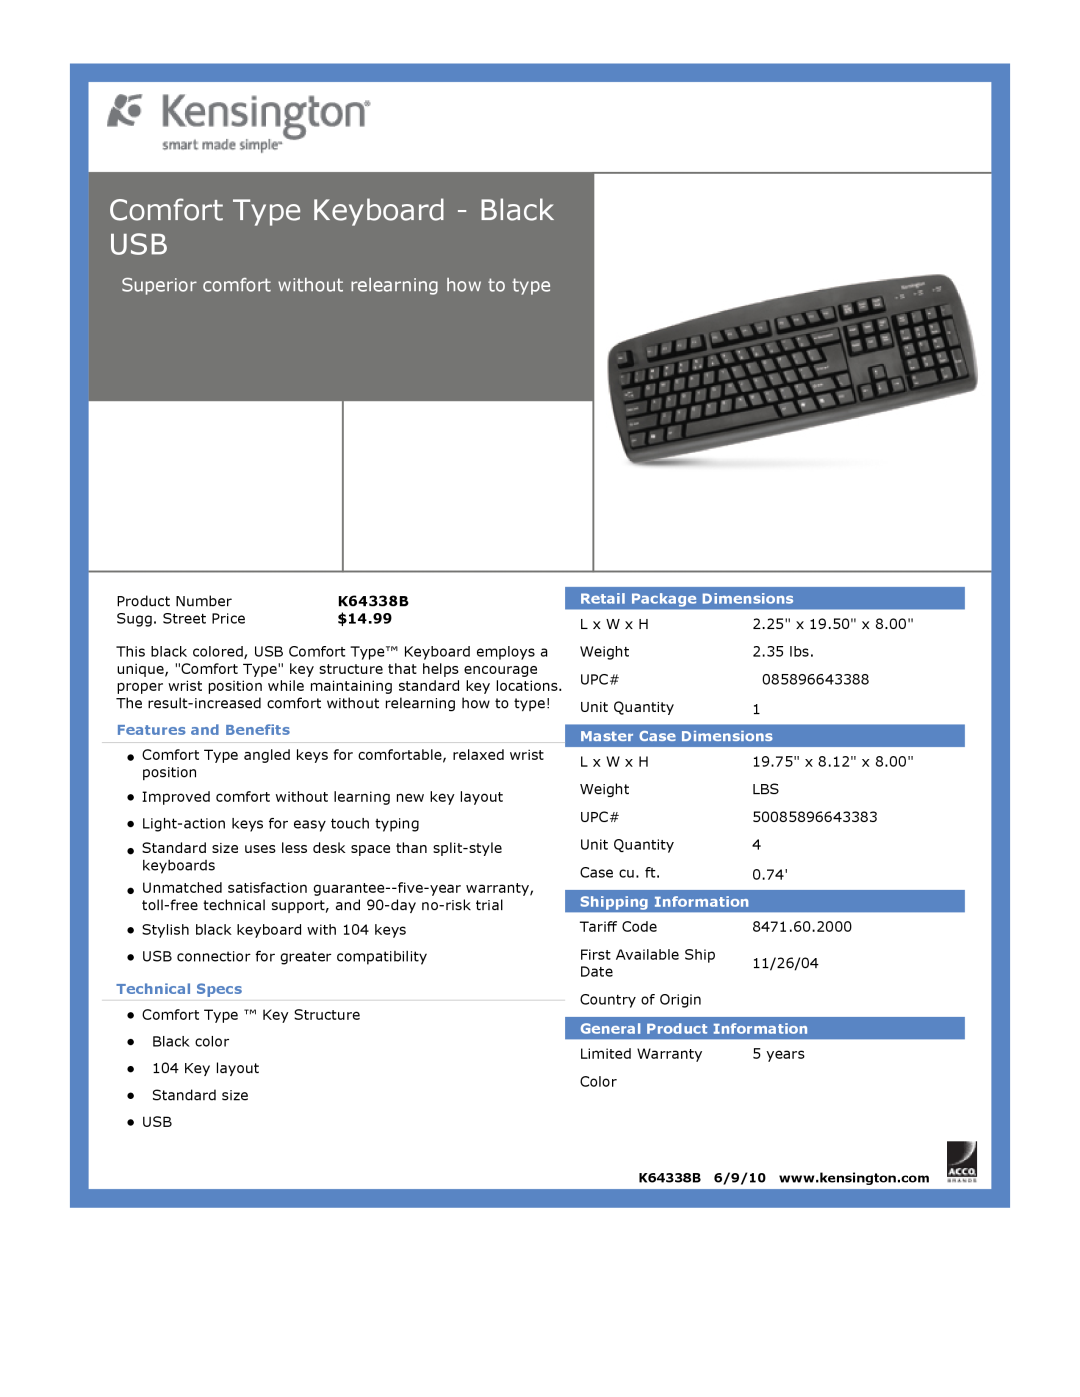 Kensington EU64325 dimensions Comfort Type Keyboard - Black USB, Superior comfort without relearning how to type, $14.99 